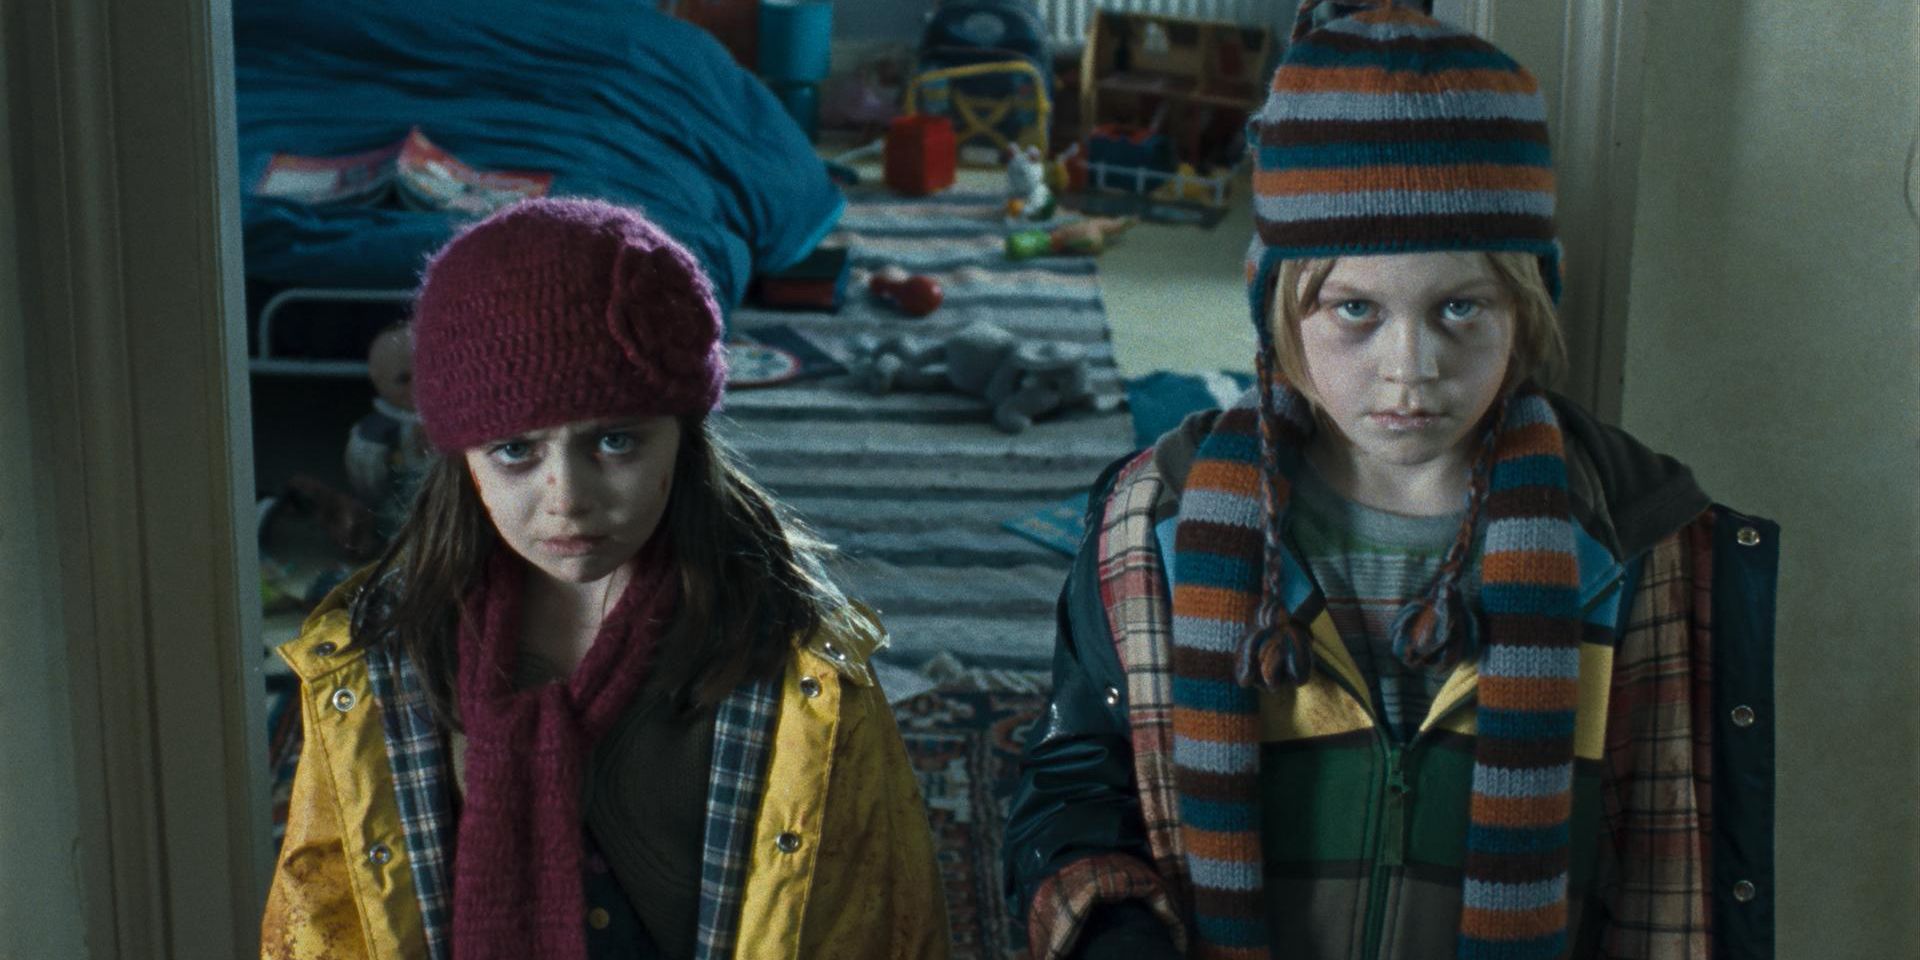 Two of the killer kids in The Children stand in a doorway with the scarves and hats on